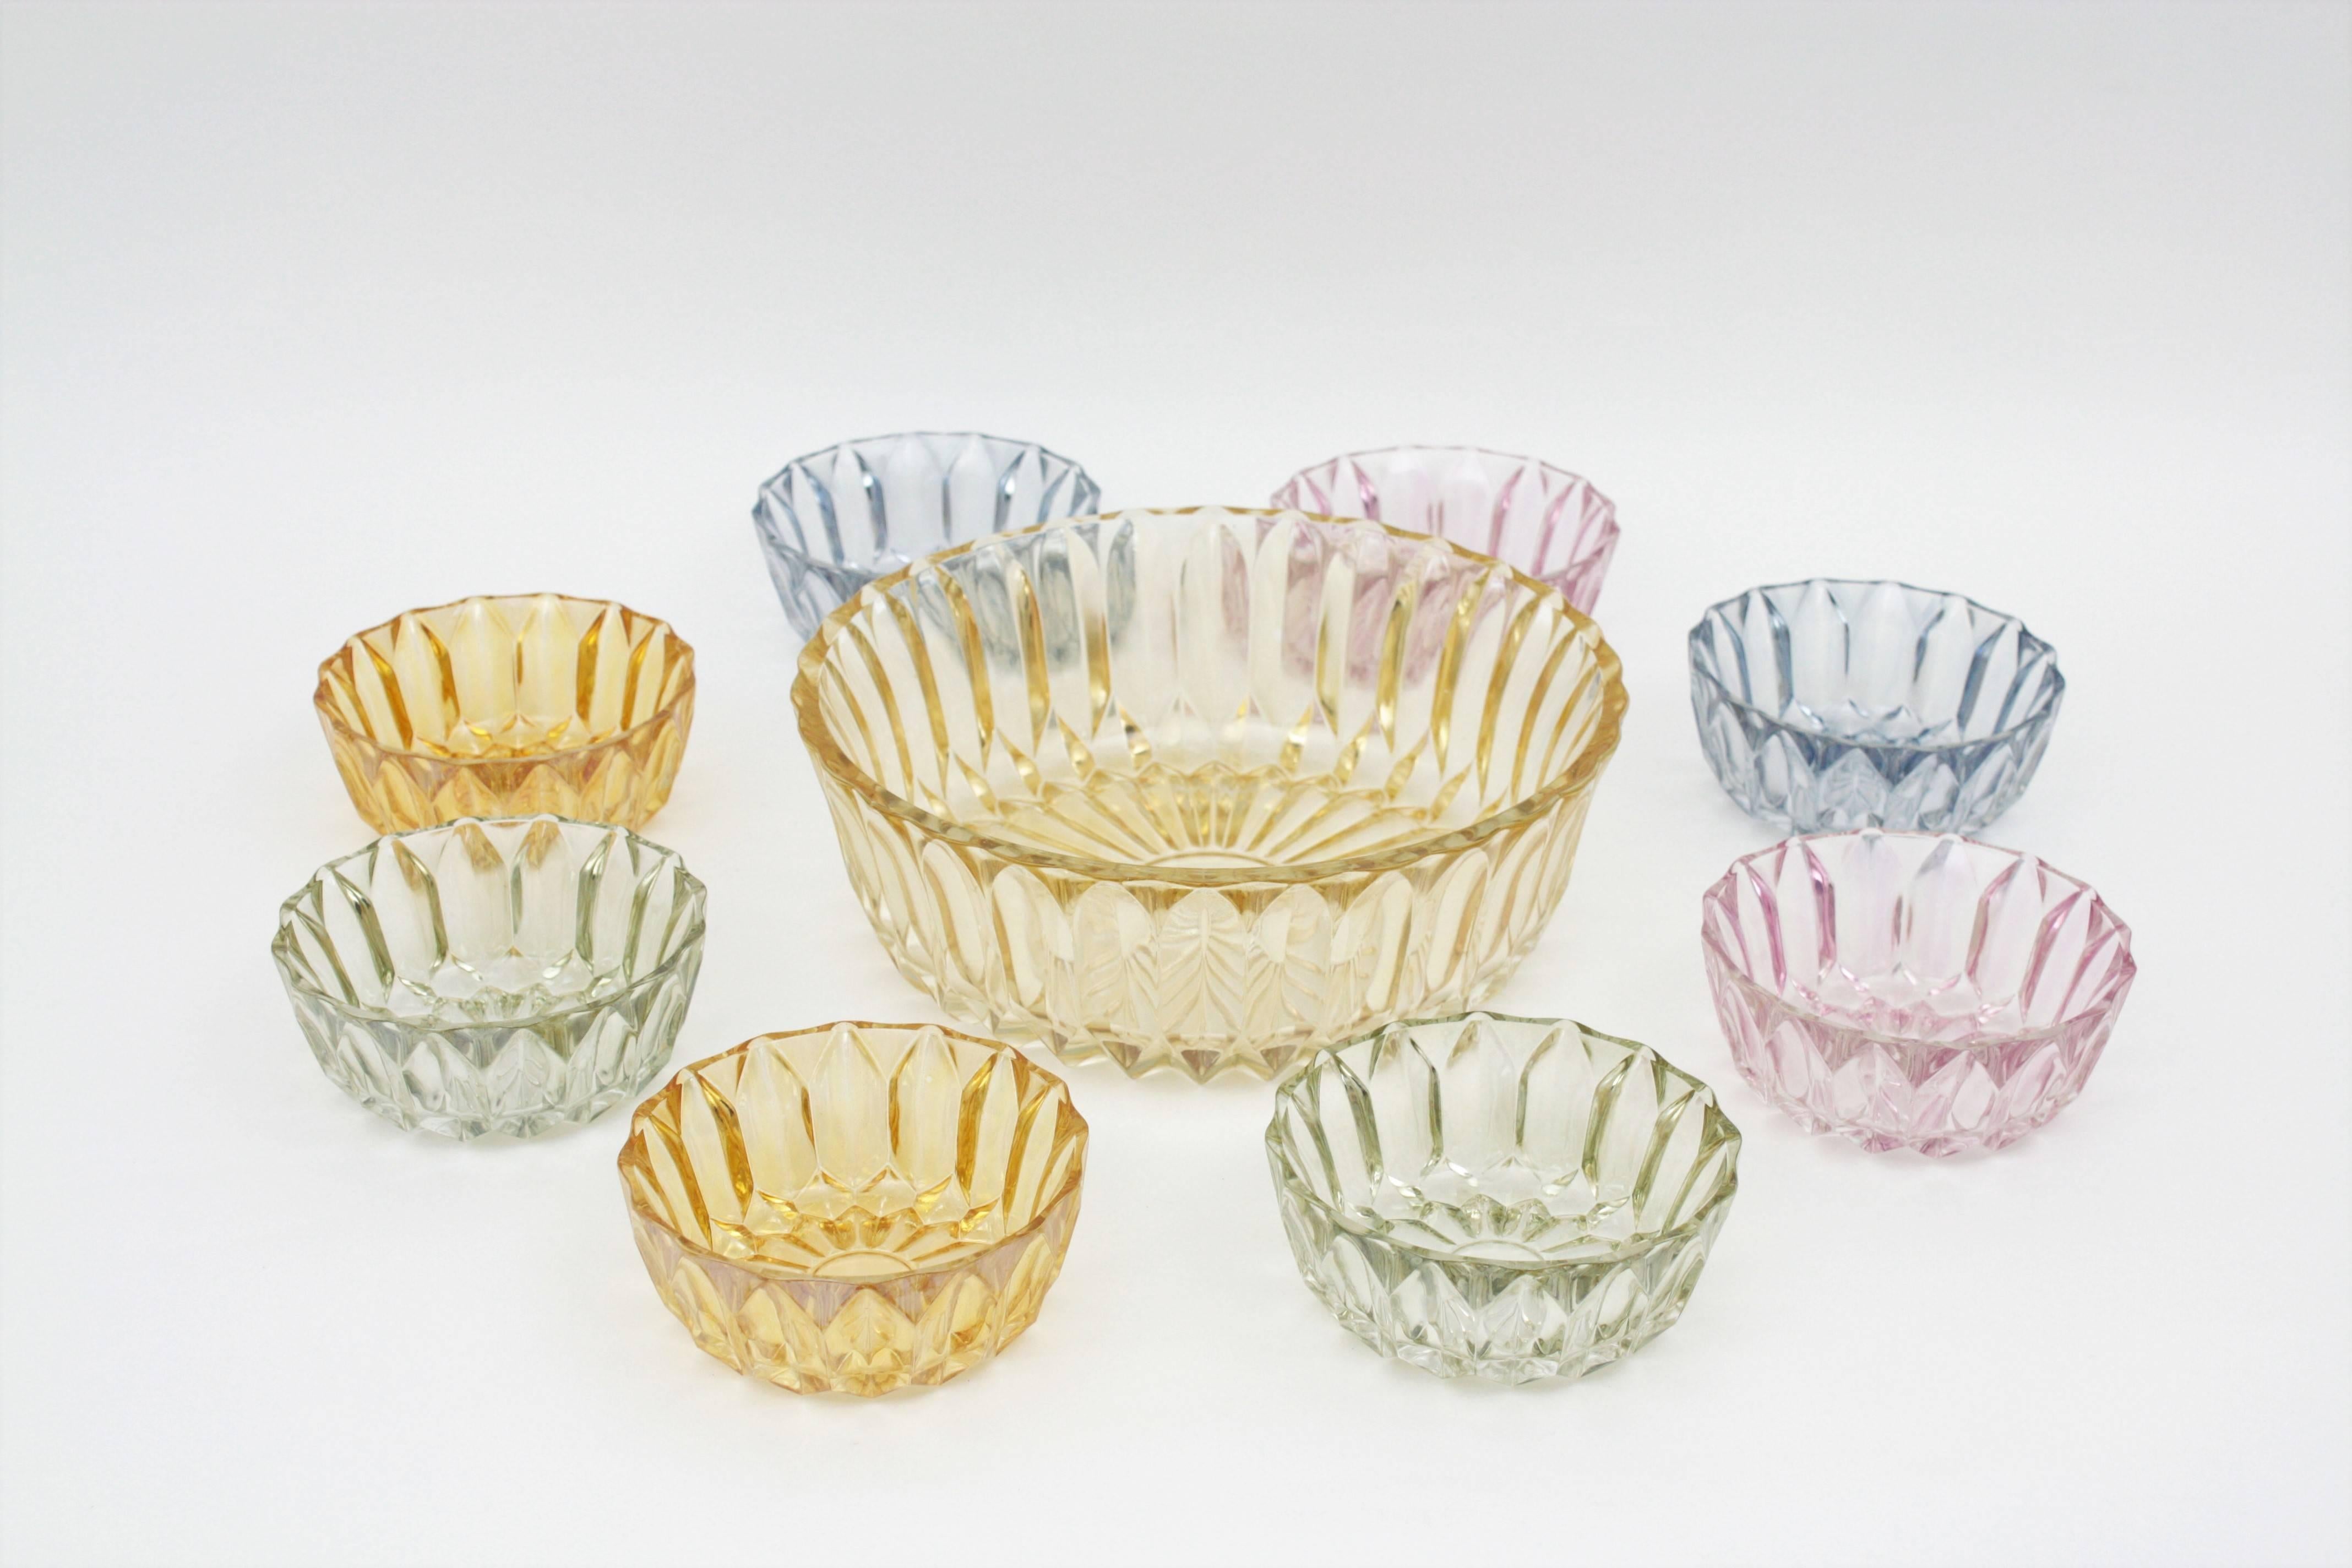 A colorful set of eight pretty pastel color pressed pattern glass round bowls and a large bowl / centerpiece. Spain, 1960-1970.
Each pair of bowls in different colors, pink, blue, green and amber with a pressed pattern that gives to the set a